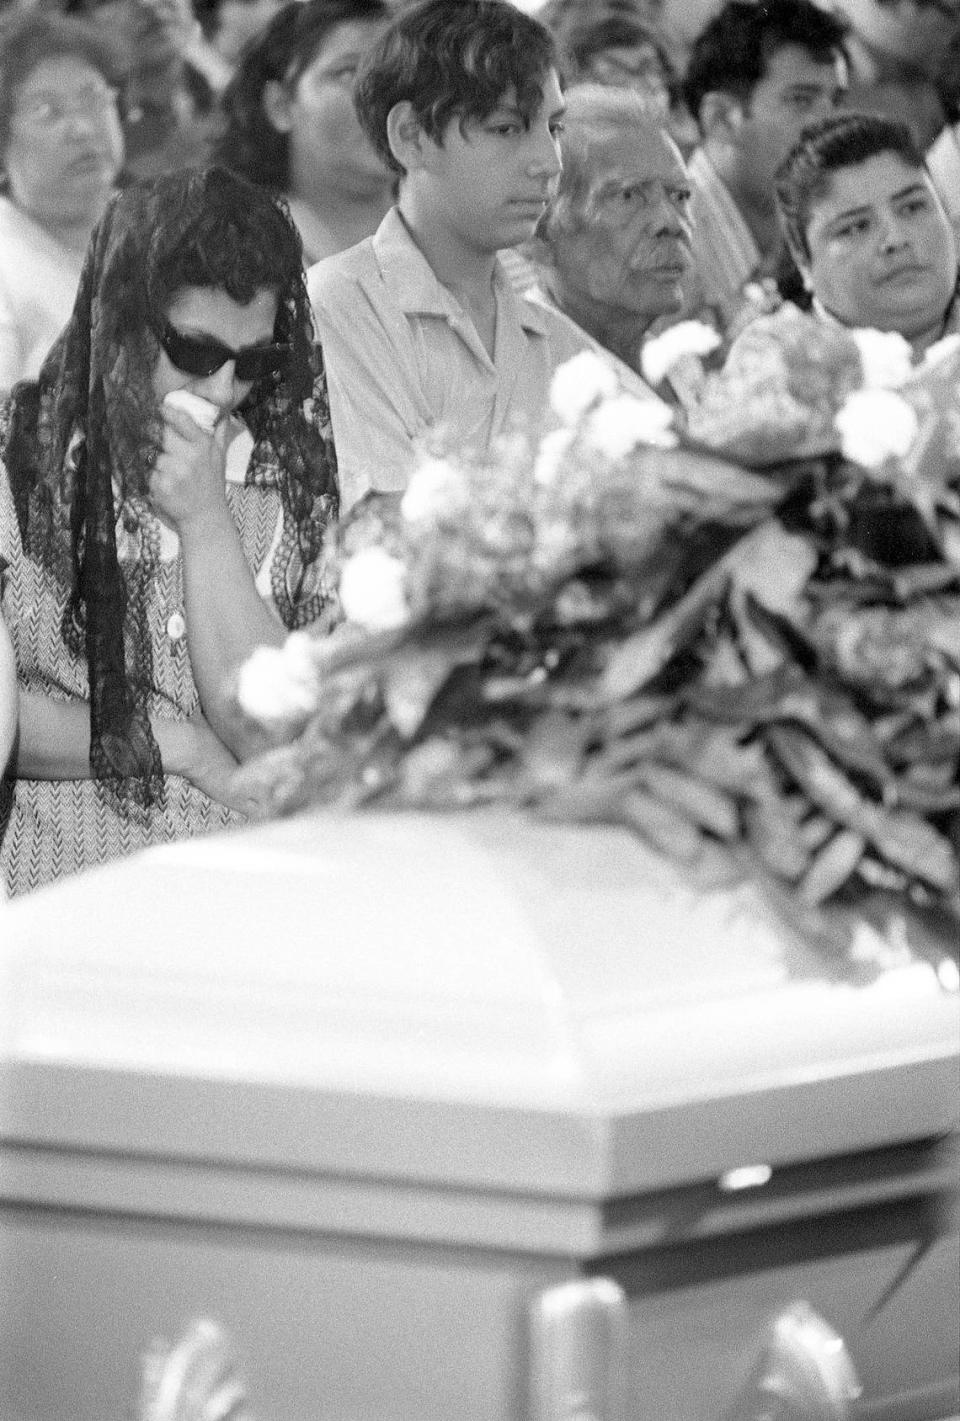 Bessie Rodriguez, David Rodriguez, and Carlos Minez, along with family and community mourners, attend Santos Rodriguez’s funeral on July 26, 1973. Courtesy/Dallas History & Archives Division, Dallas Public Library